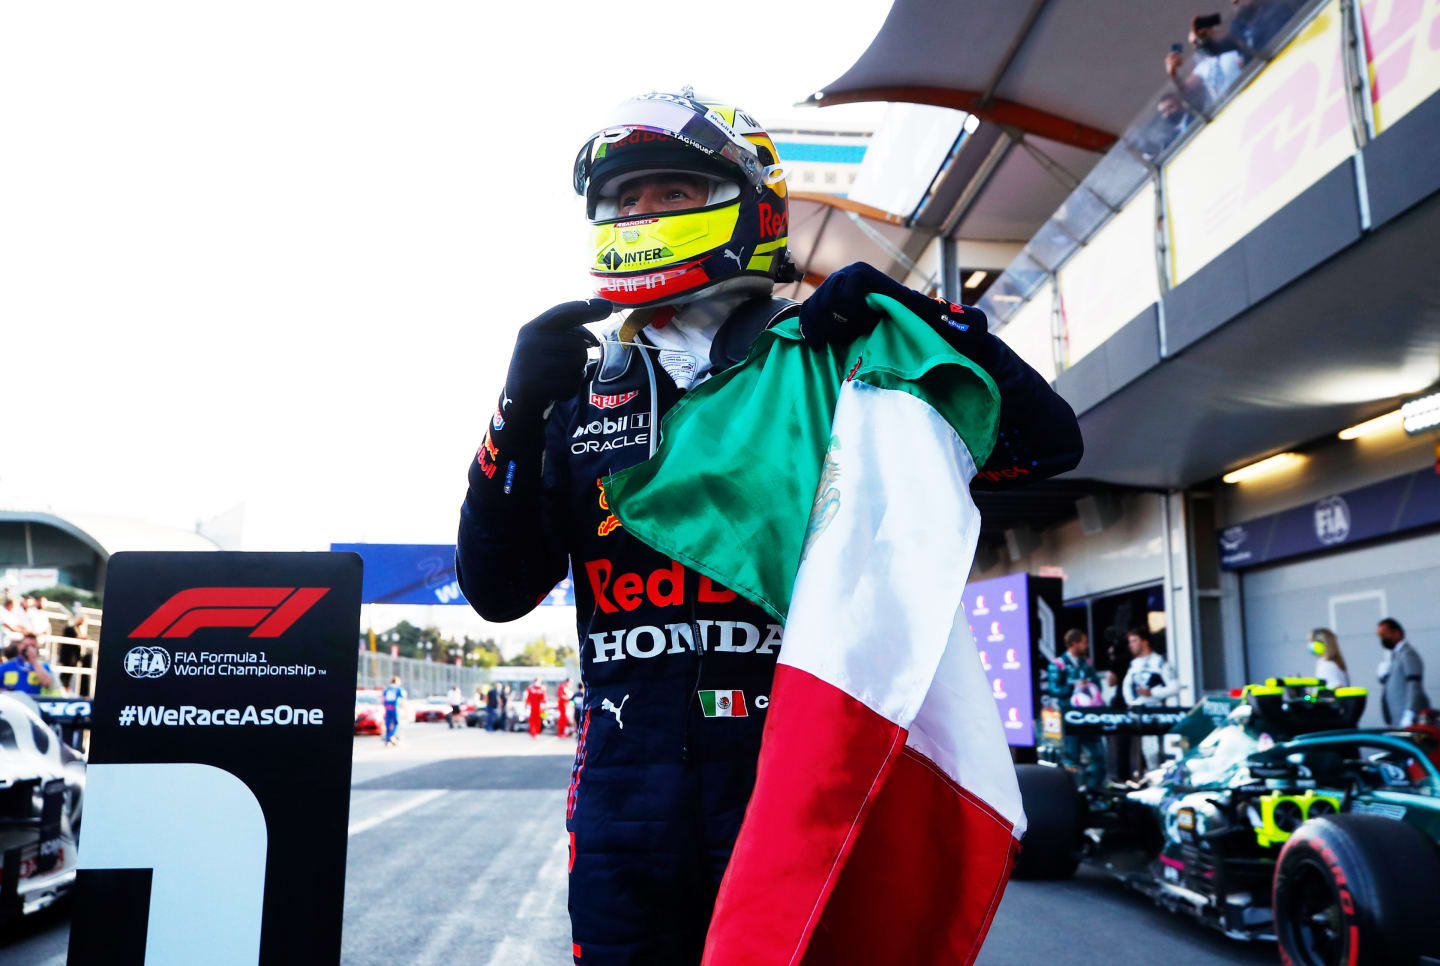 BAKU, AZERBAIJAN - JUNE 06: Race winner Sergio Perez of Mexico and Red Bull Racing celebrates in parc ferme during the F1 Grand Prix of Azerbaijan at Baku City Circuit on June 06, 2021 in Baku, Azerbaijan. (Photo by Maxim Shemetov - Pool/Getty Images)